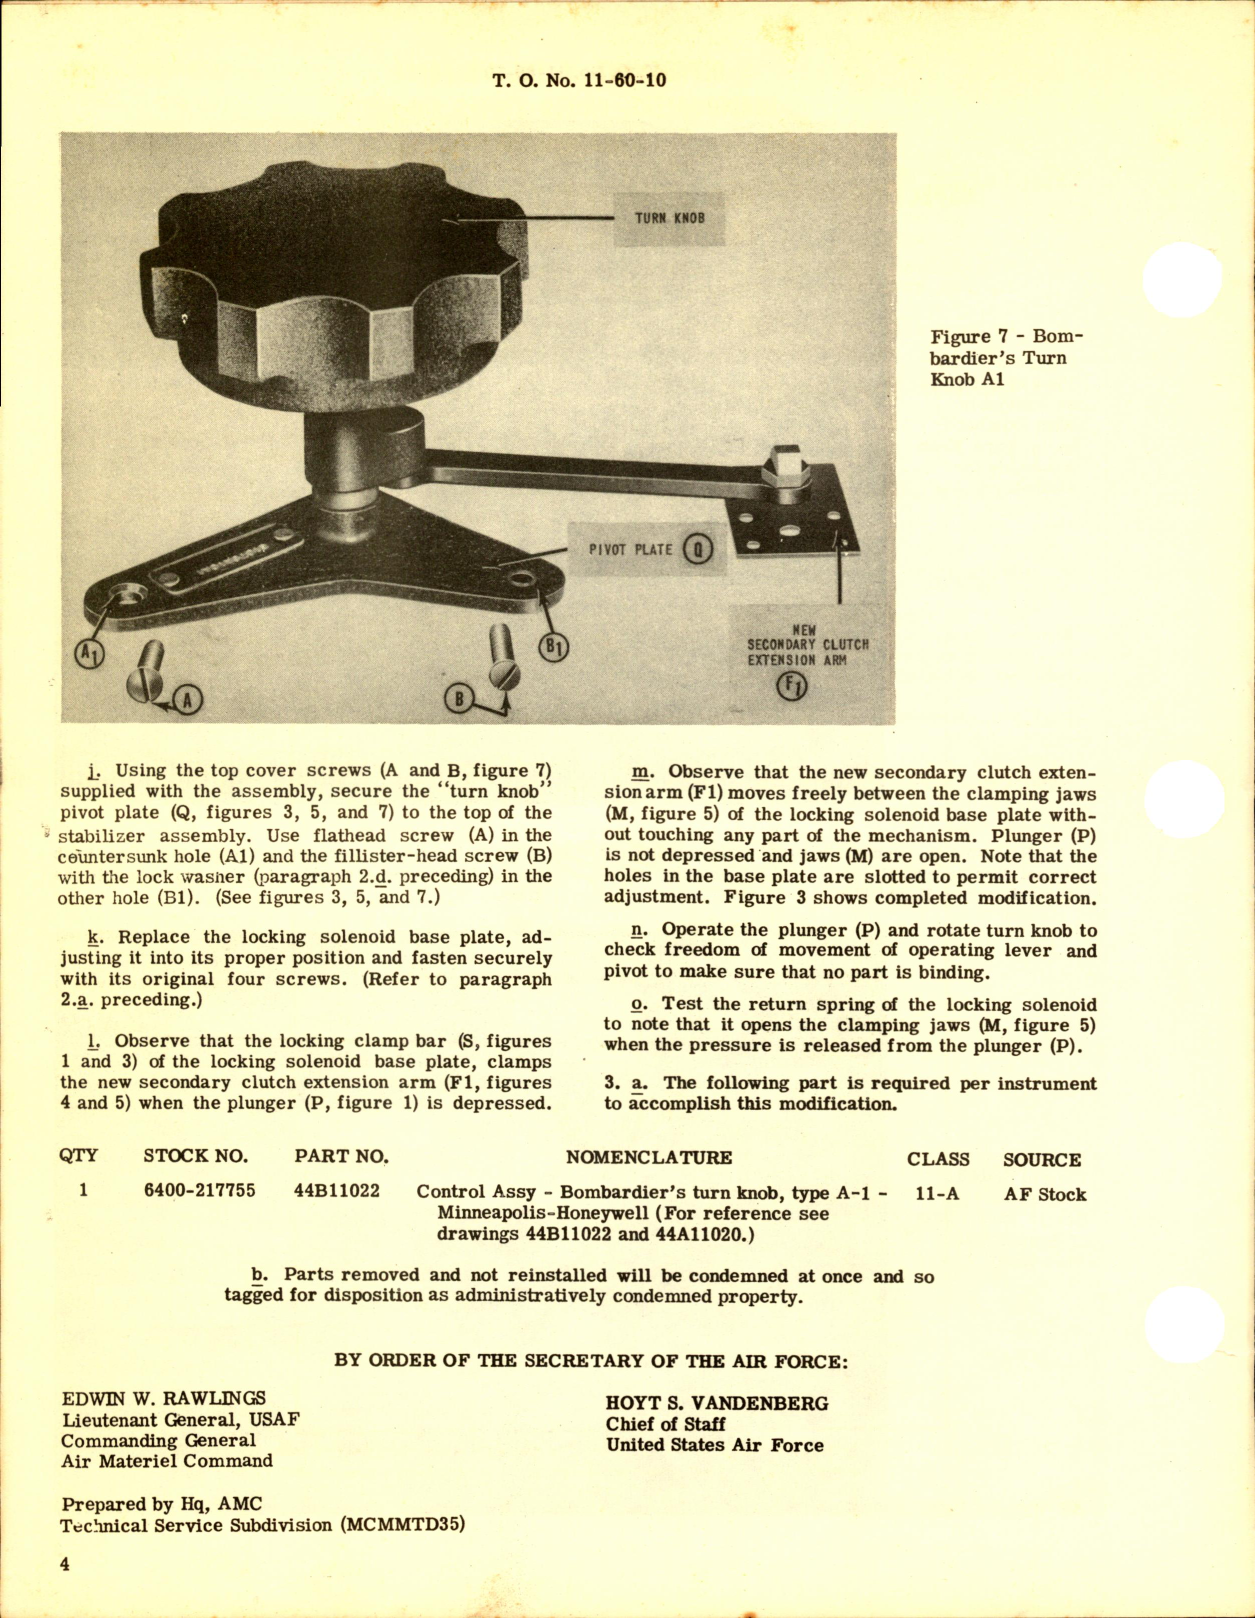 Sample page 4 from AirCorps Library document: Installation of Bombardier's Turn Knob Assembly